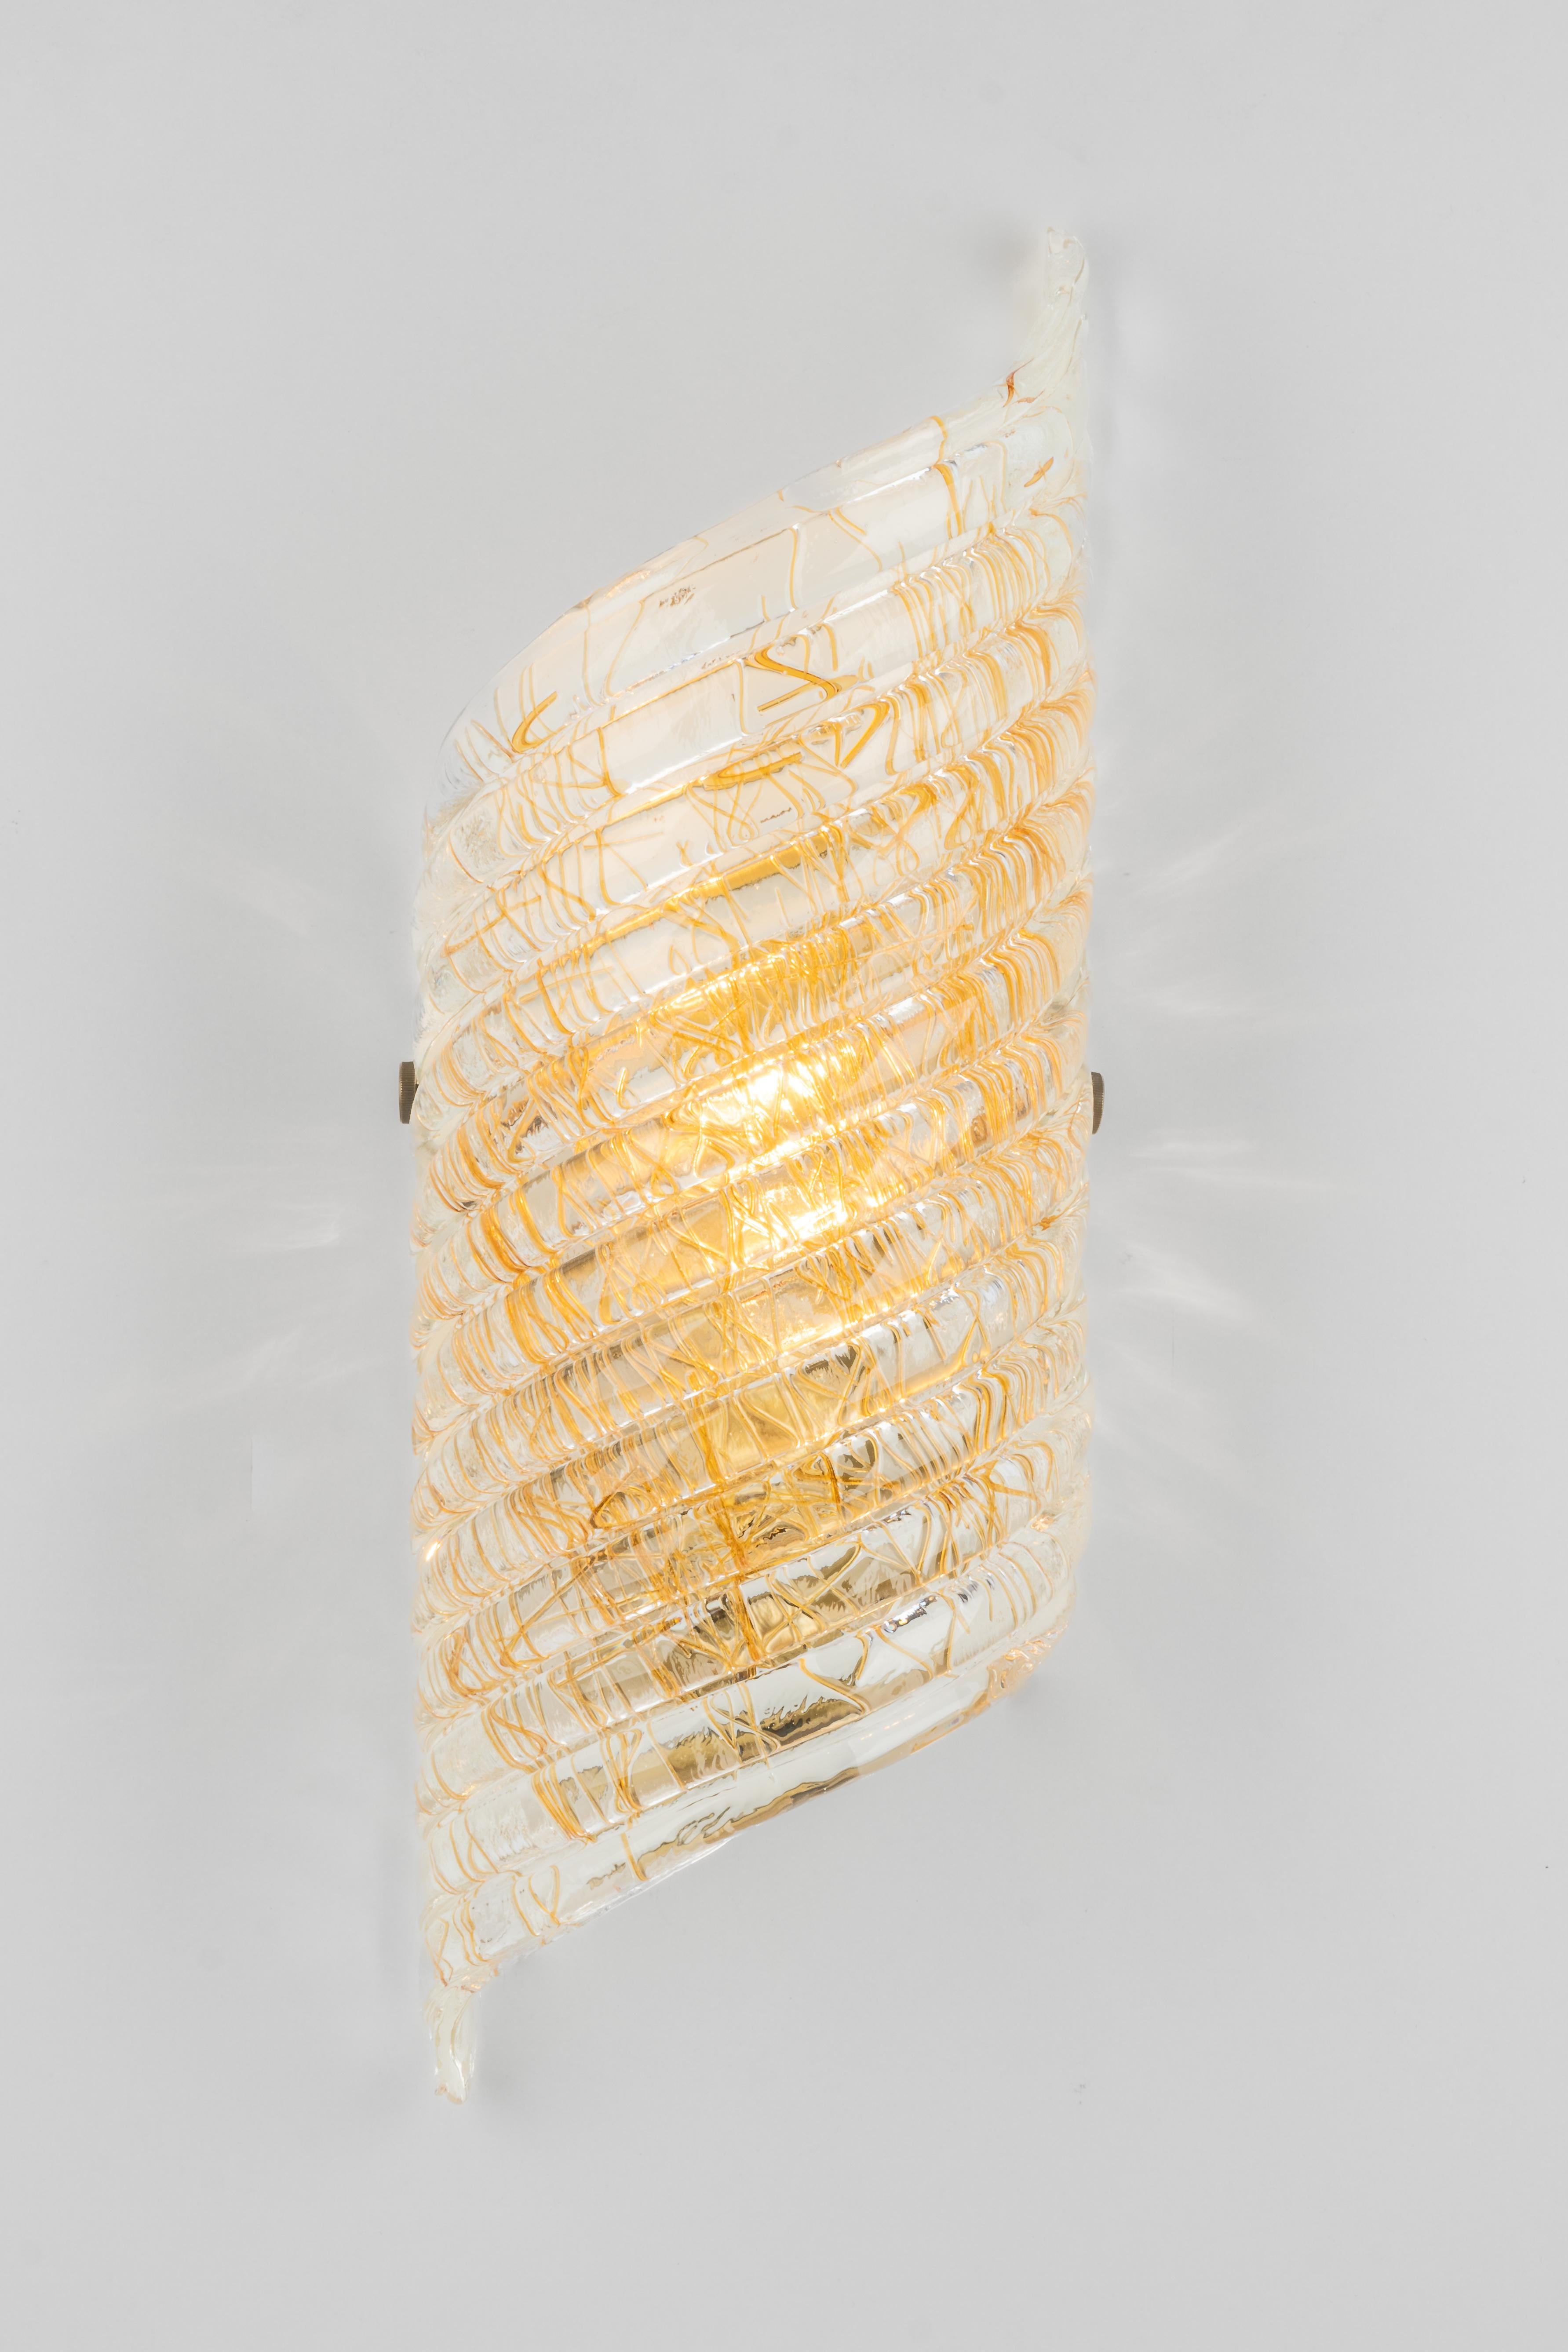 Single Large Murano Brass Sconce by Hillebrand, Germany, 1970s For Sale 1